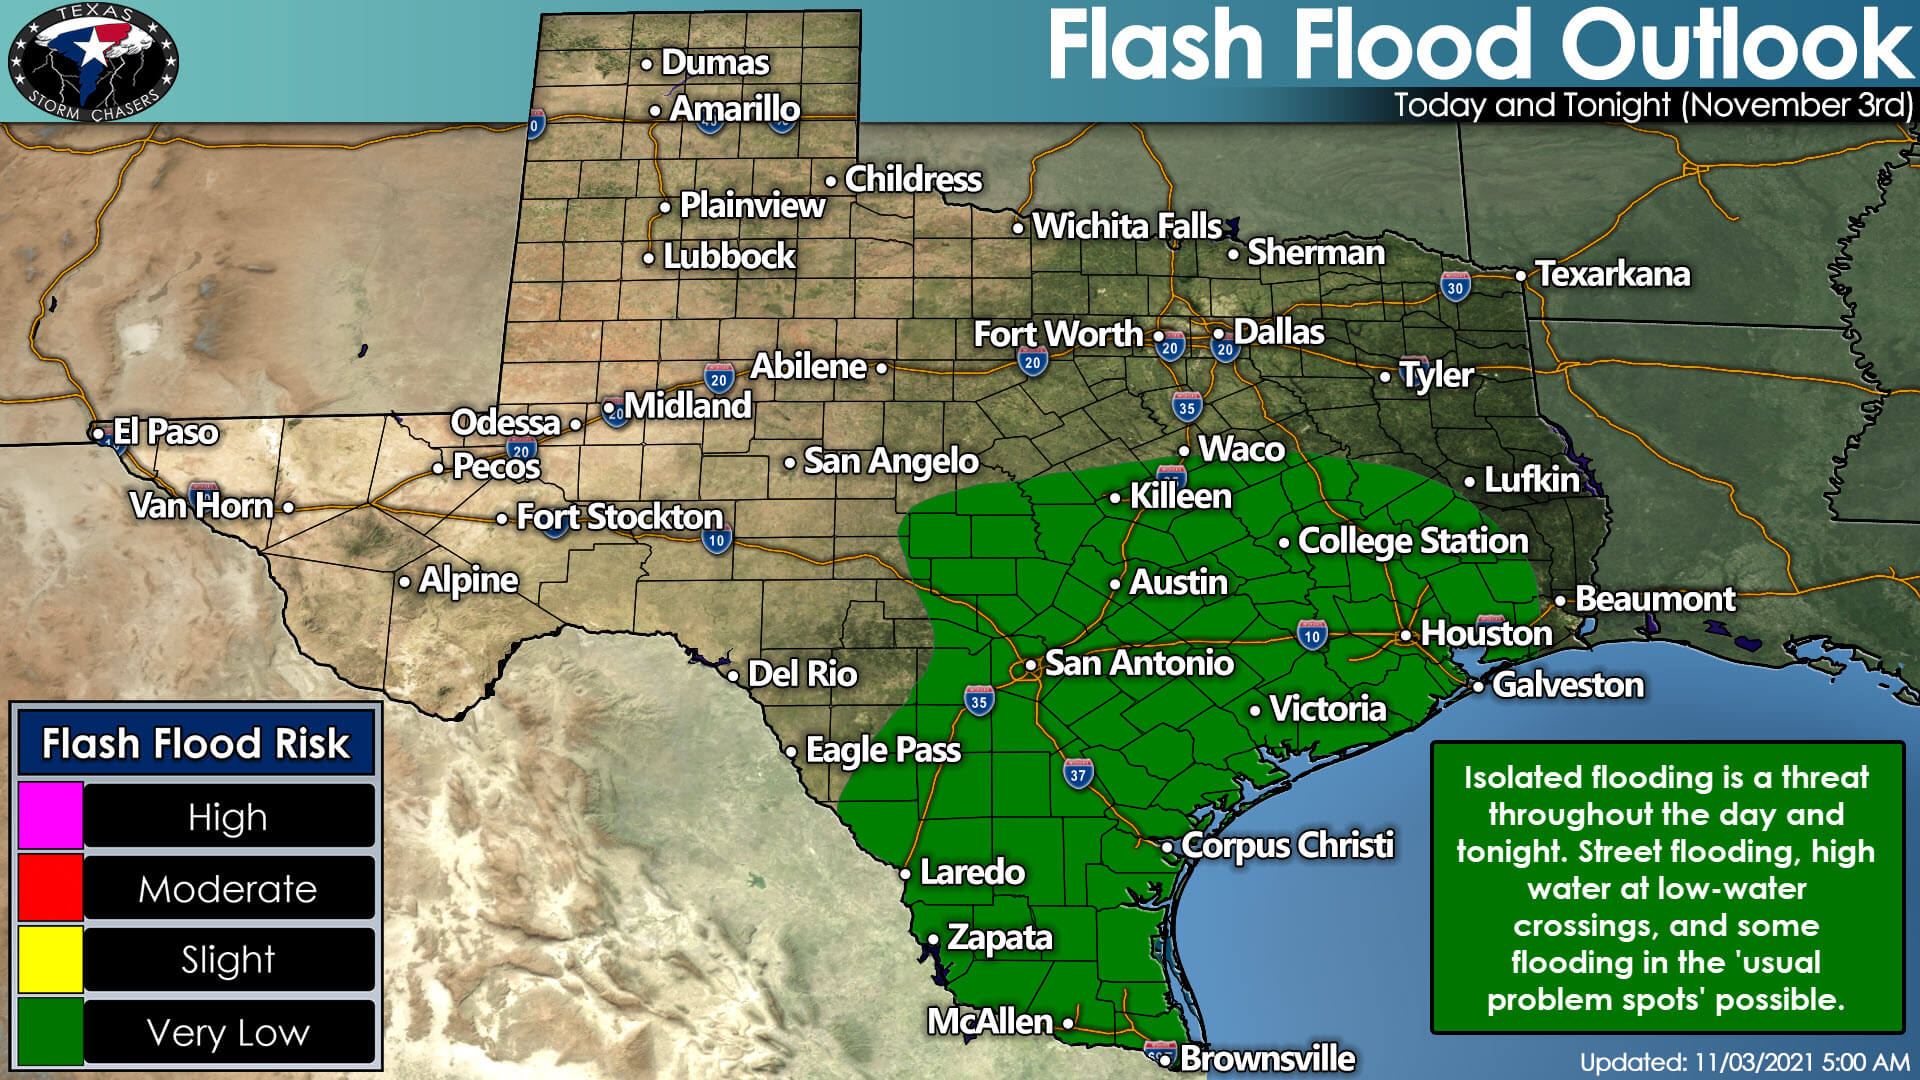 Isolated flooding is possible across Central Texas, the Hill Country, South Texas, the Brazos Valley, Southeast Texas, and the Rio Grande Valley today and tonight.